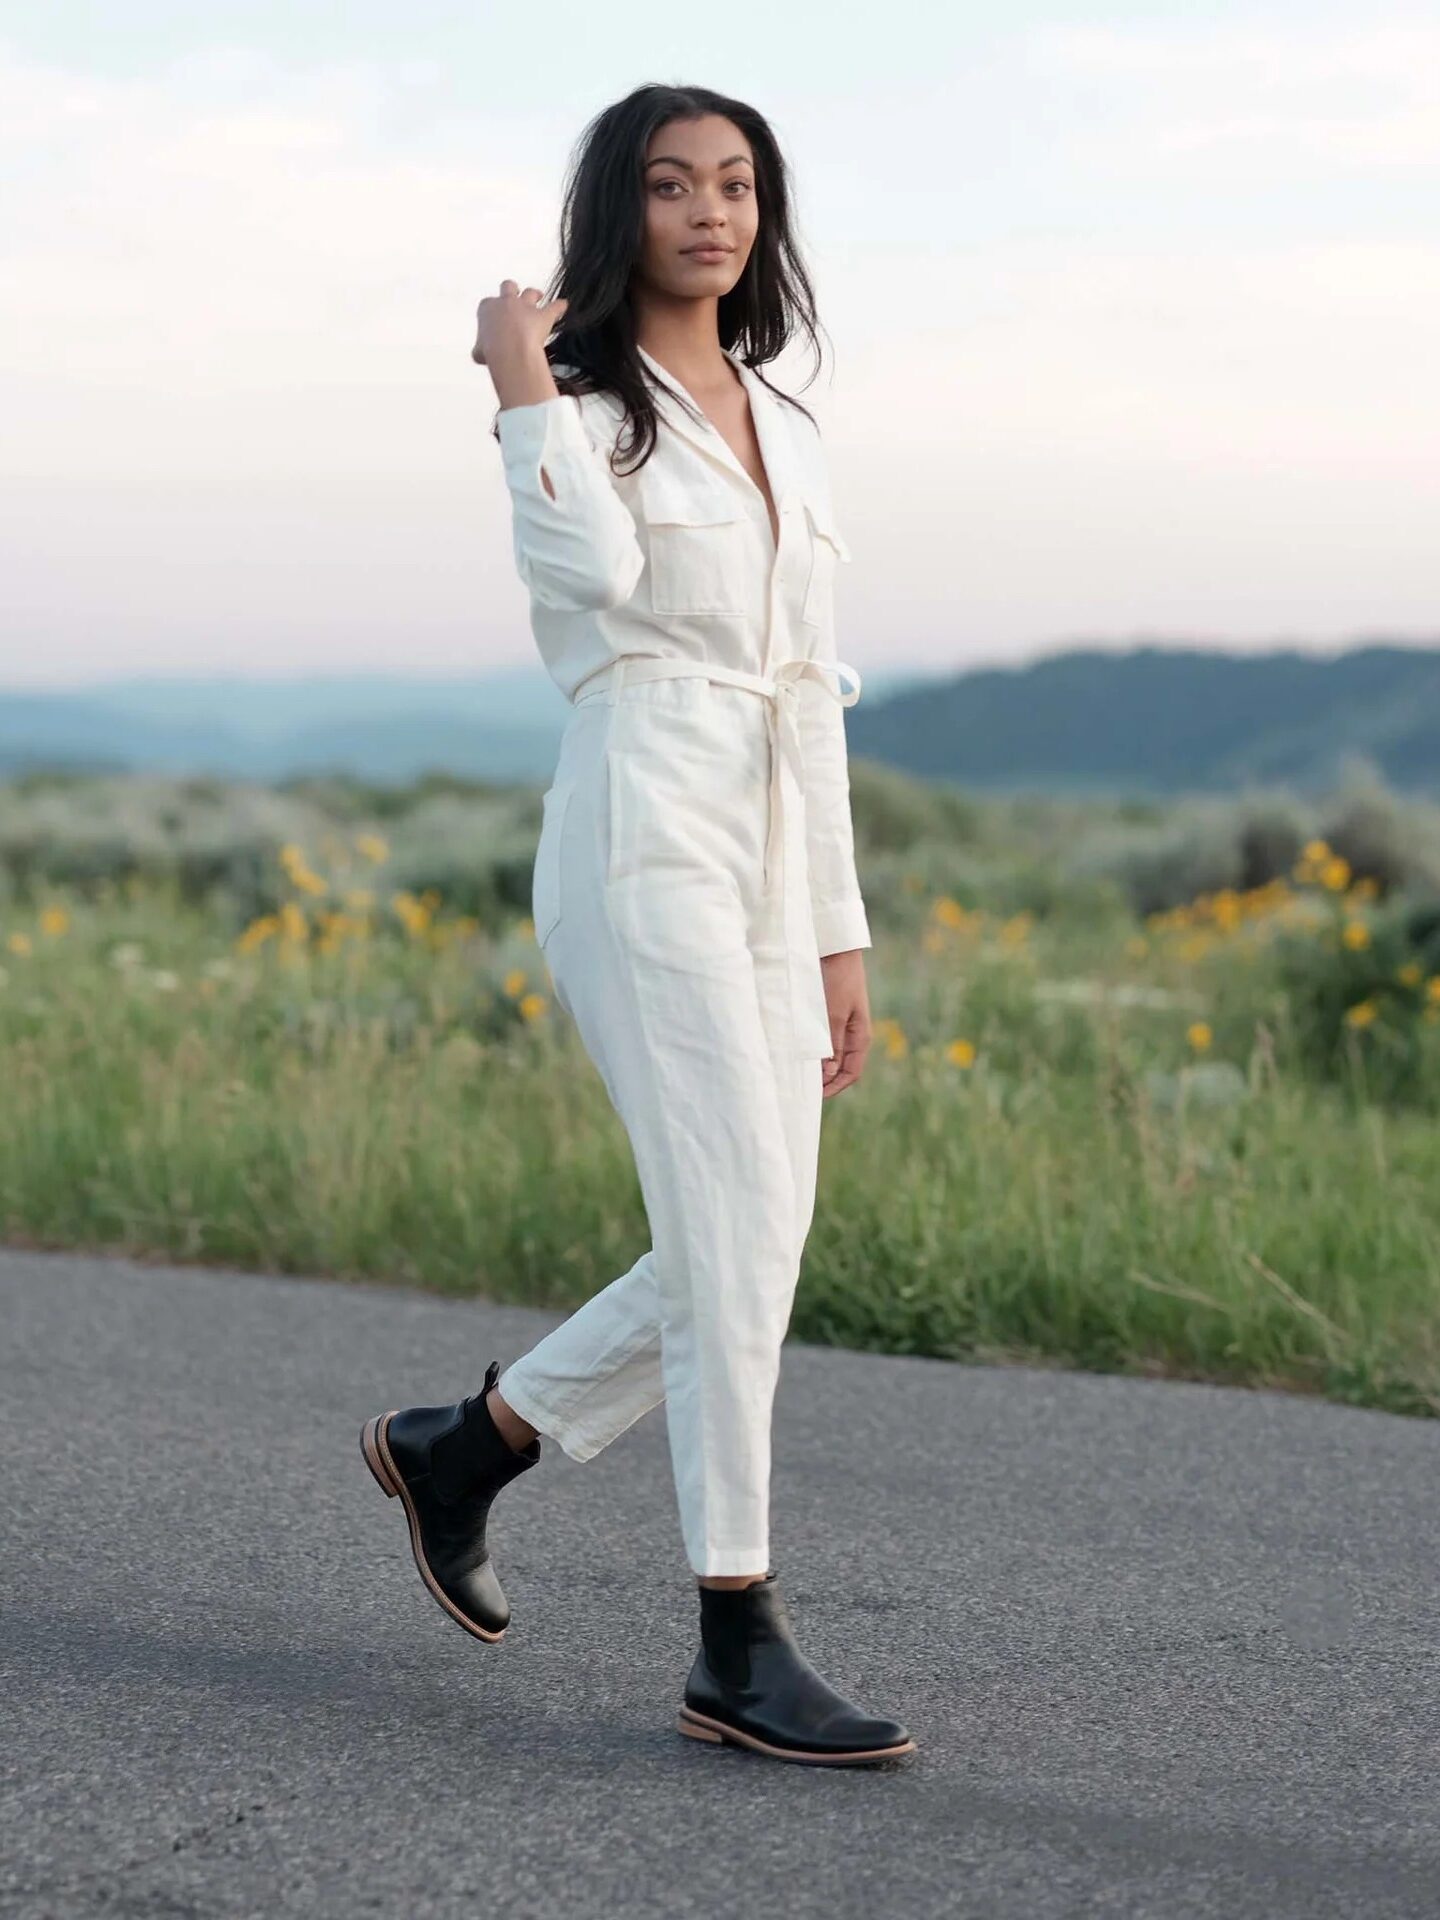 A woman in a white jumpsuit and black boots walks along a rural road with fields of yellow flowers in the background at dusk.